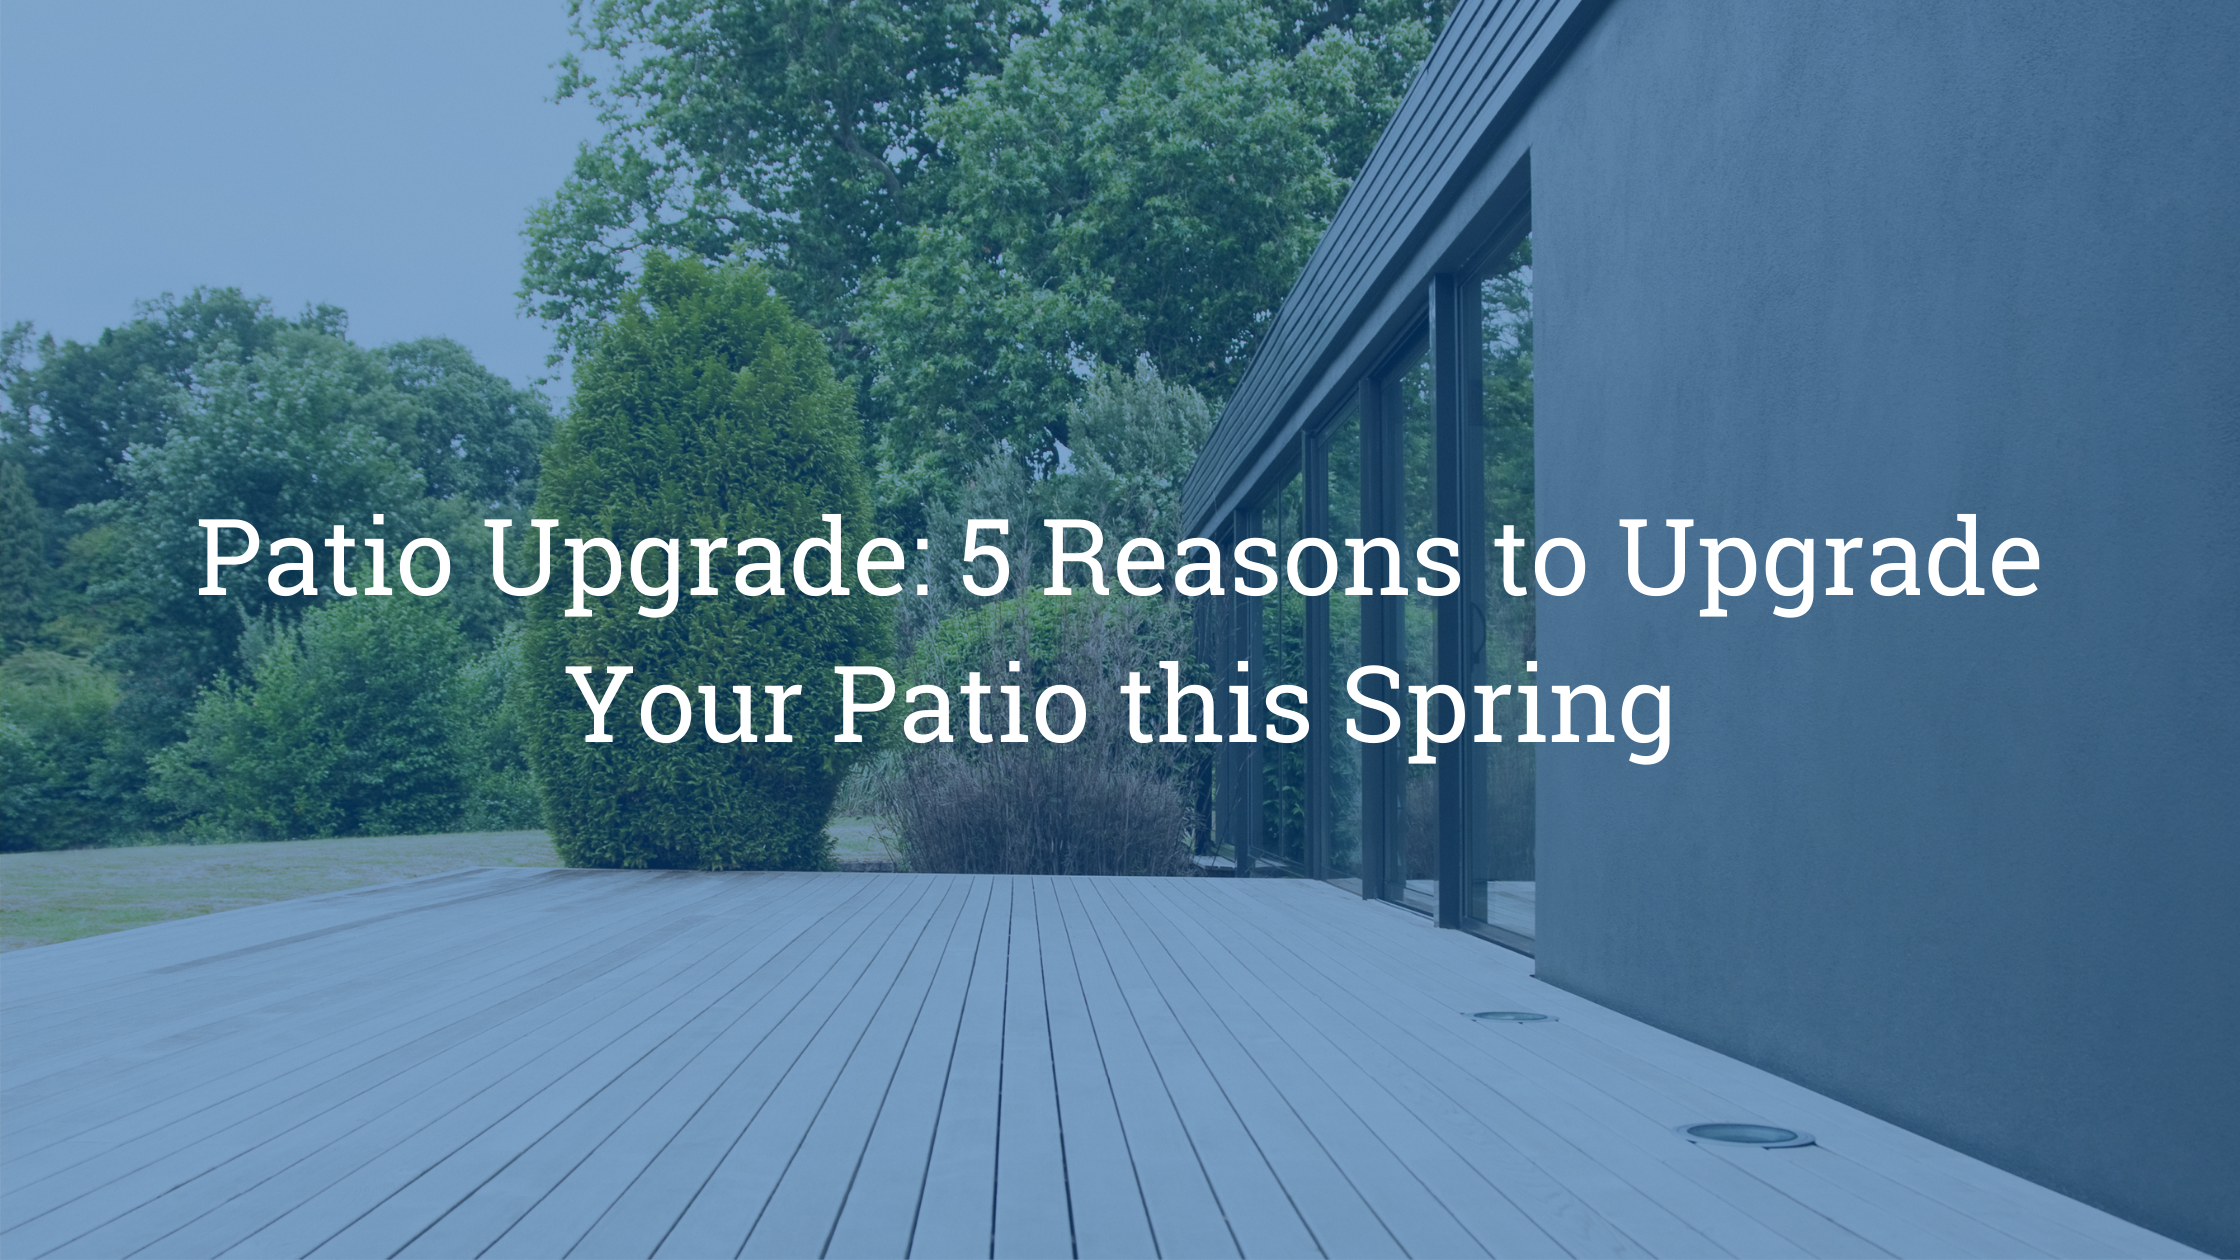 https://雷竞技下载链接官网appwww.explorizers.com/wp-content/uploads/2021/05/Patio-Upgrade_-5-Reasons-to-Upgrade-Your-Patio-this-Spring-1.png